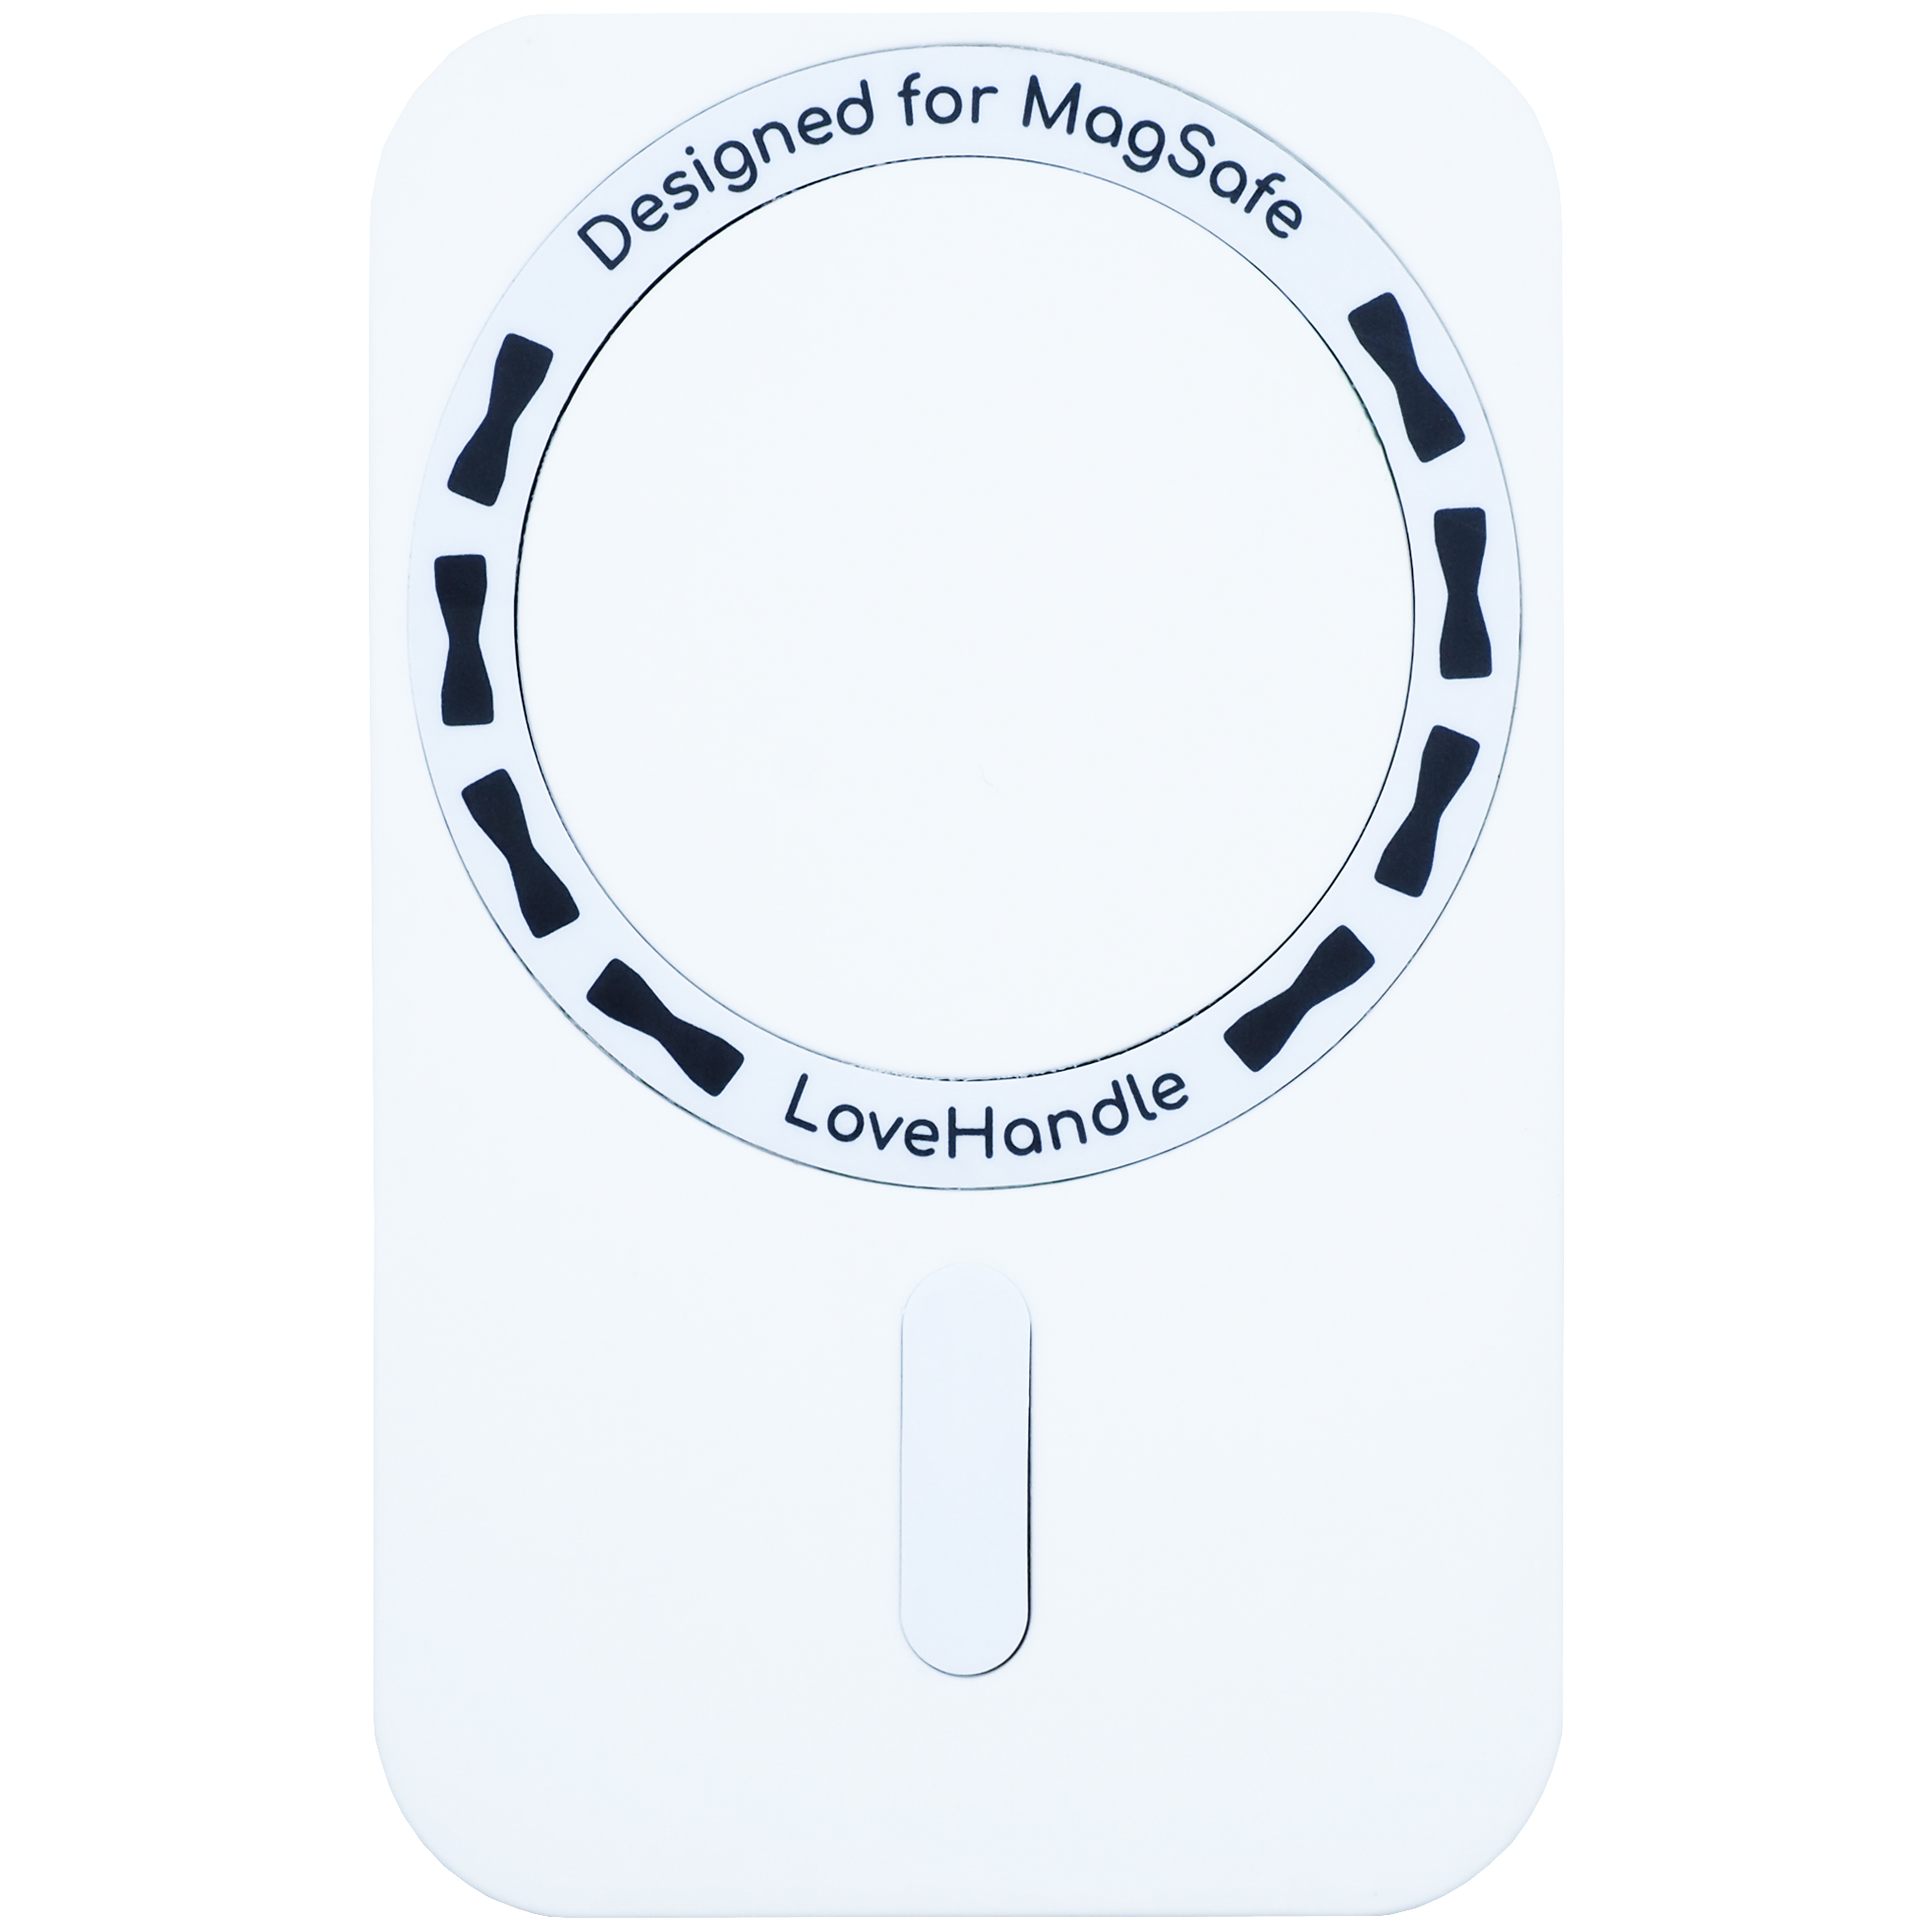 Build Your Own PRO MagSafe® Adapter